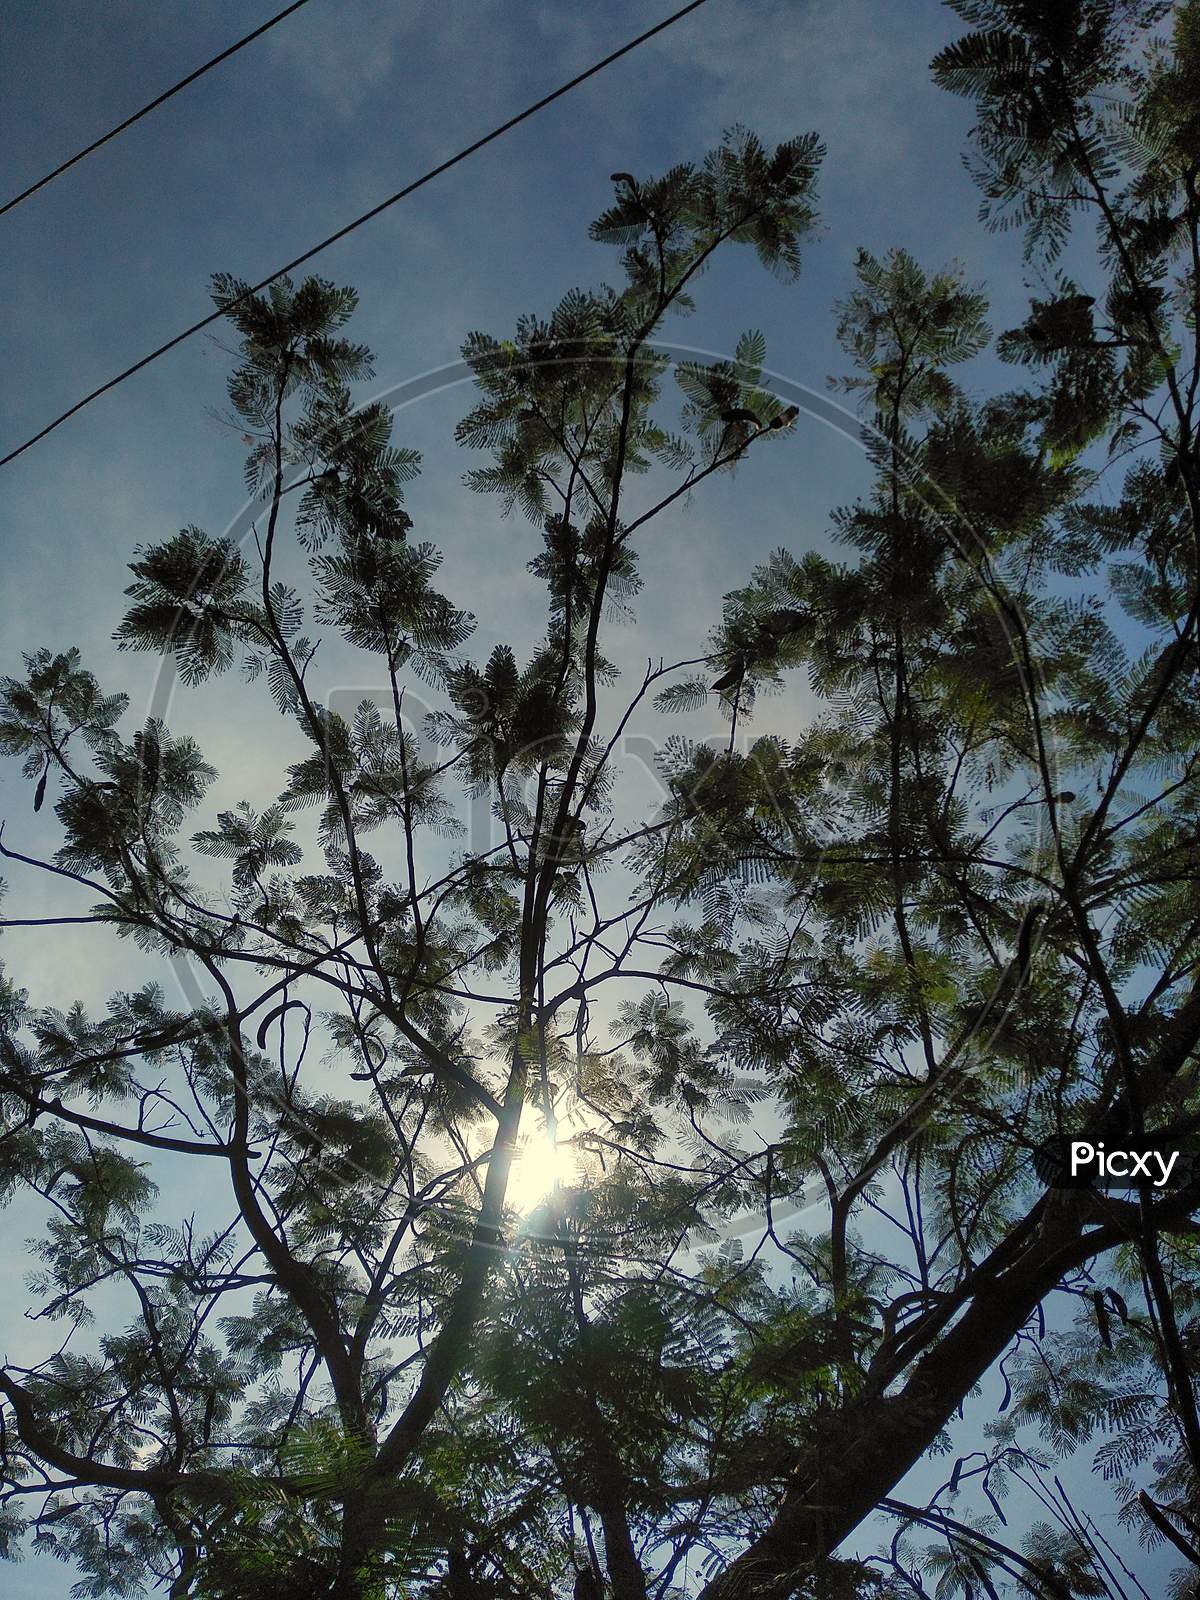 Sun visible through branches and leafs of tree.